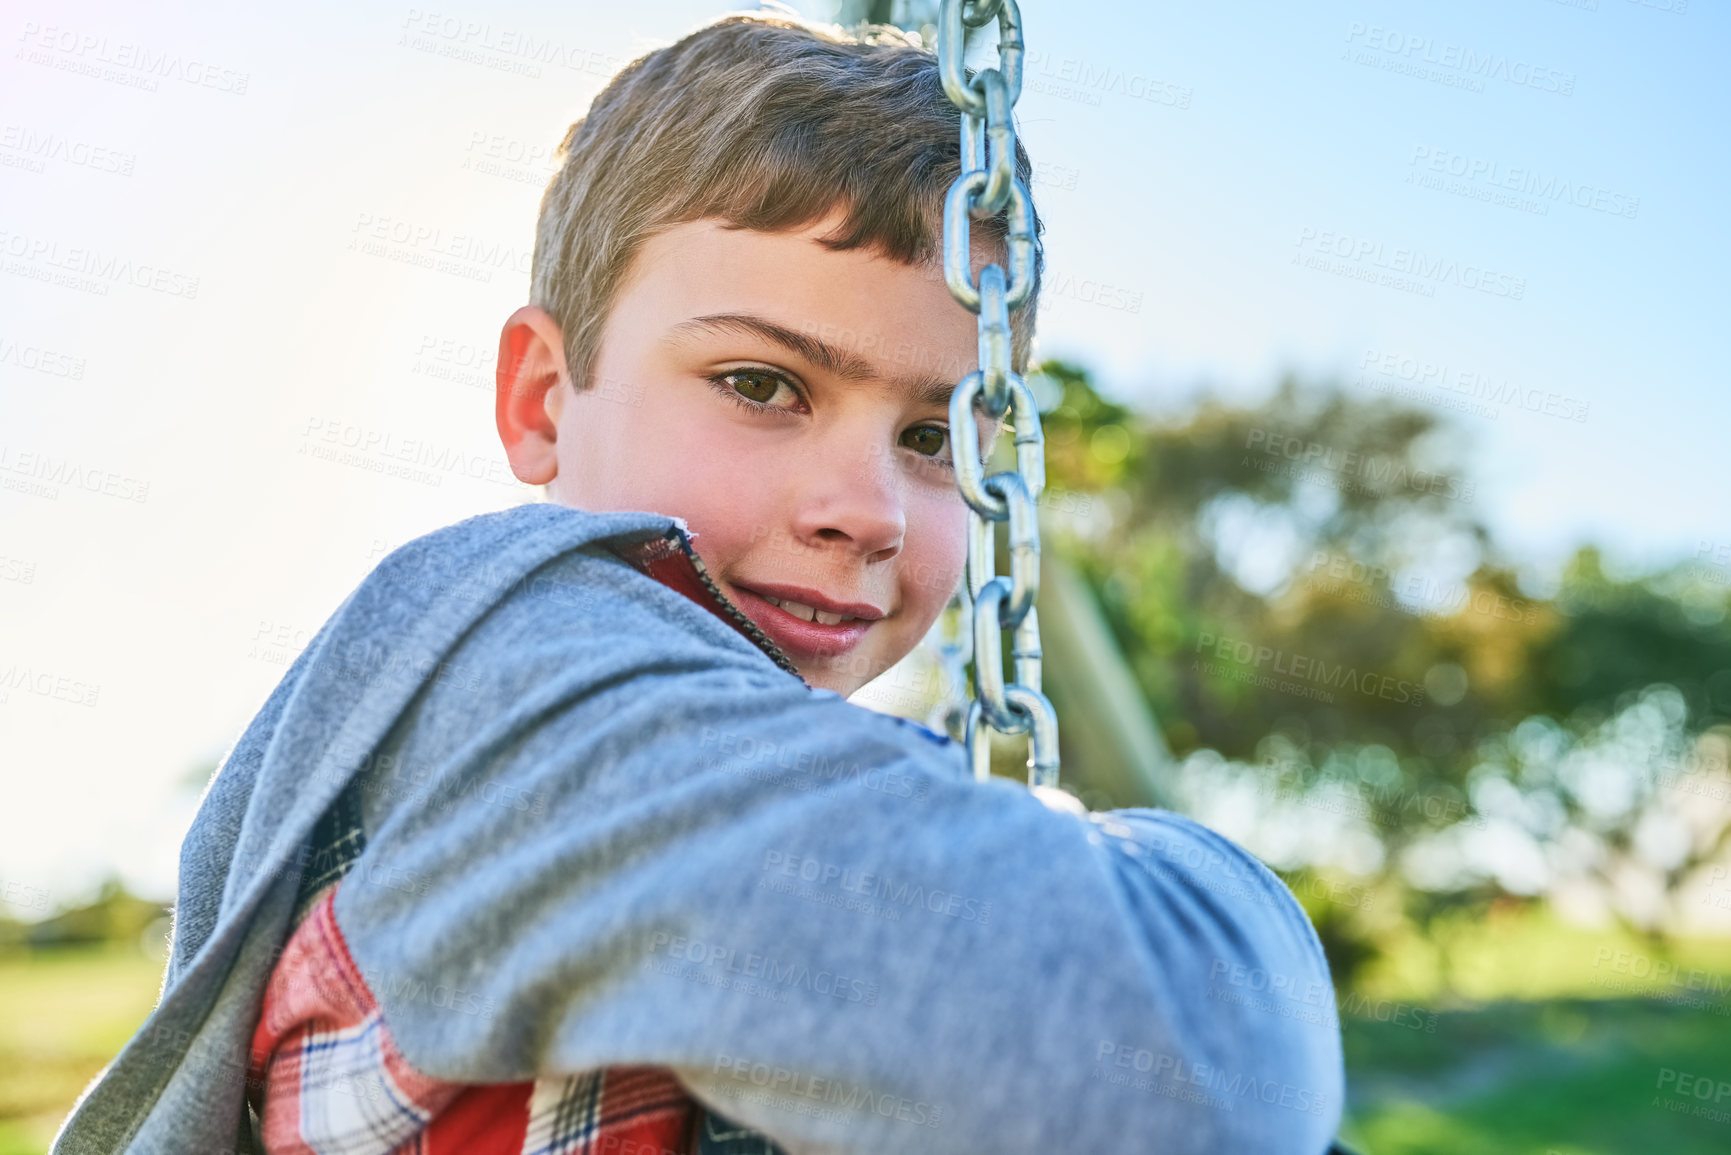 Buy stock photo Portrait of a young boy sitting on a swing in a park